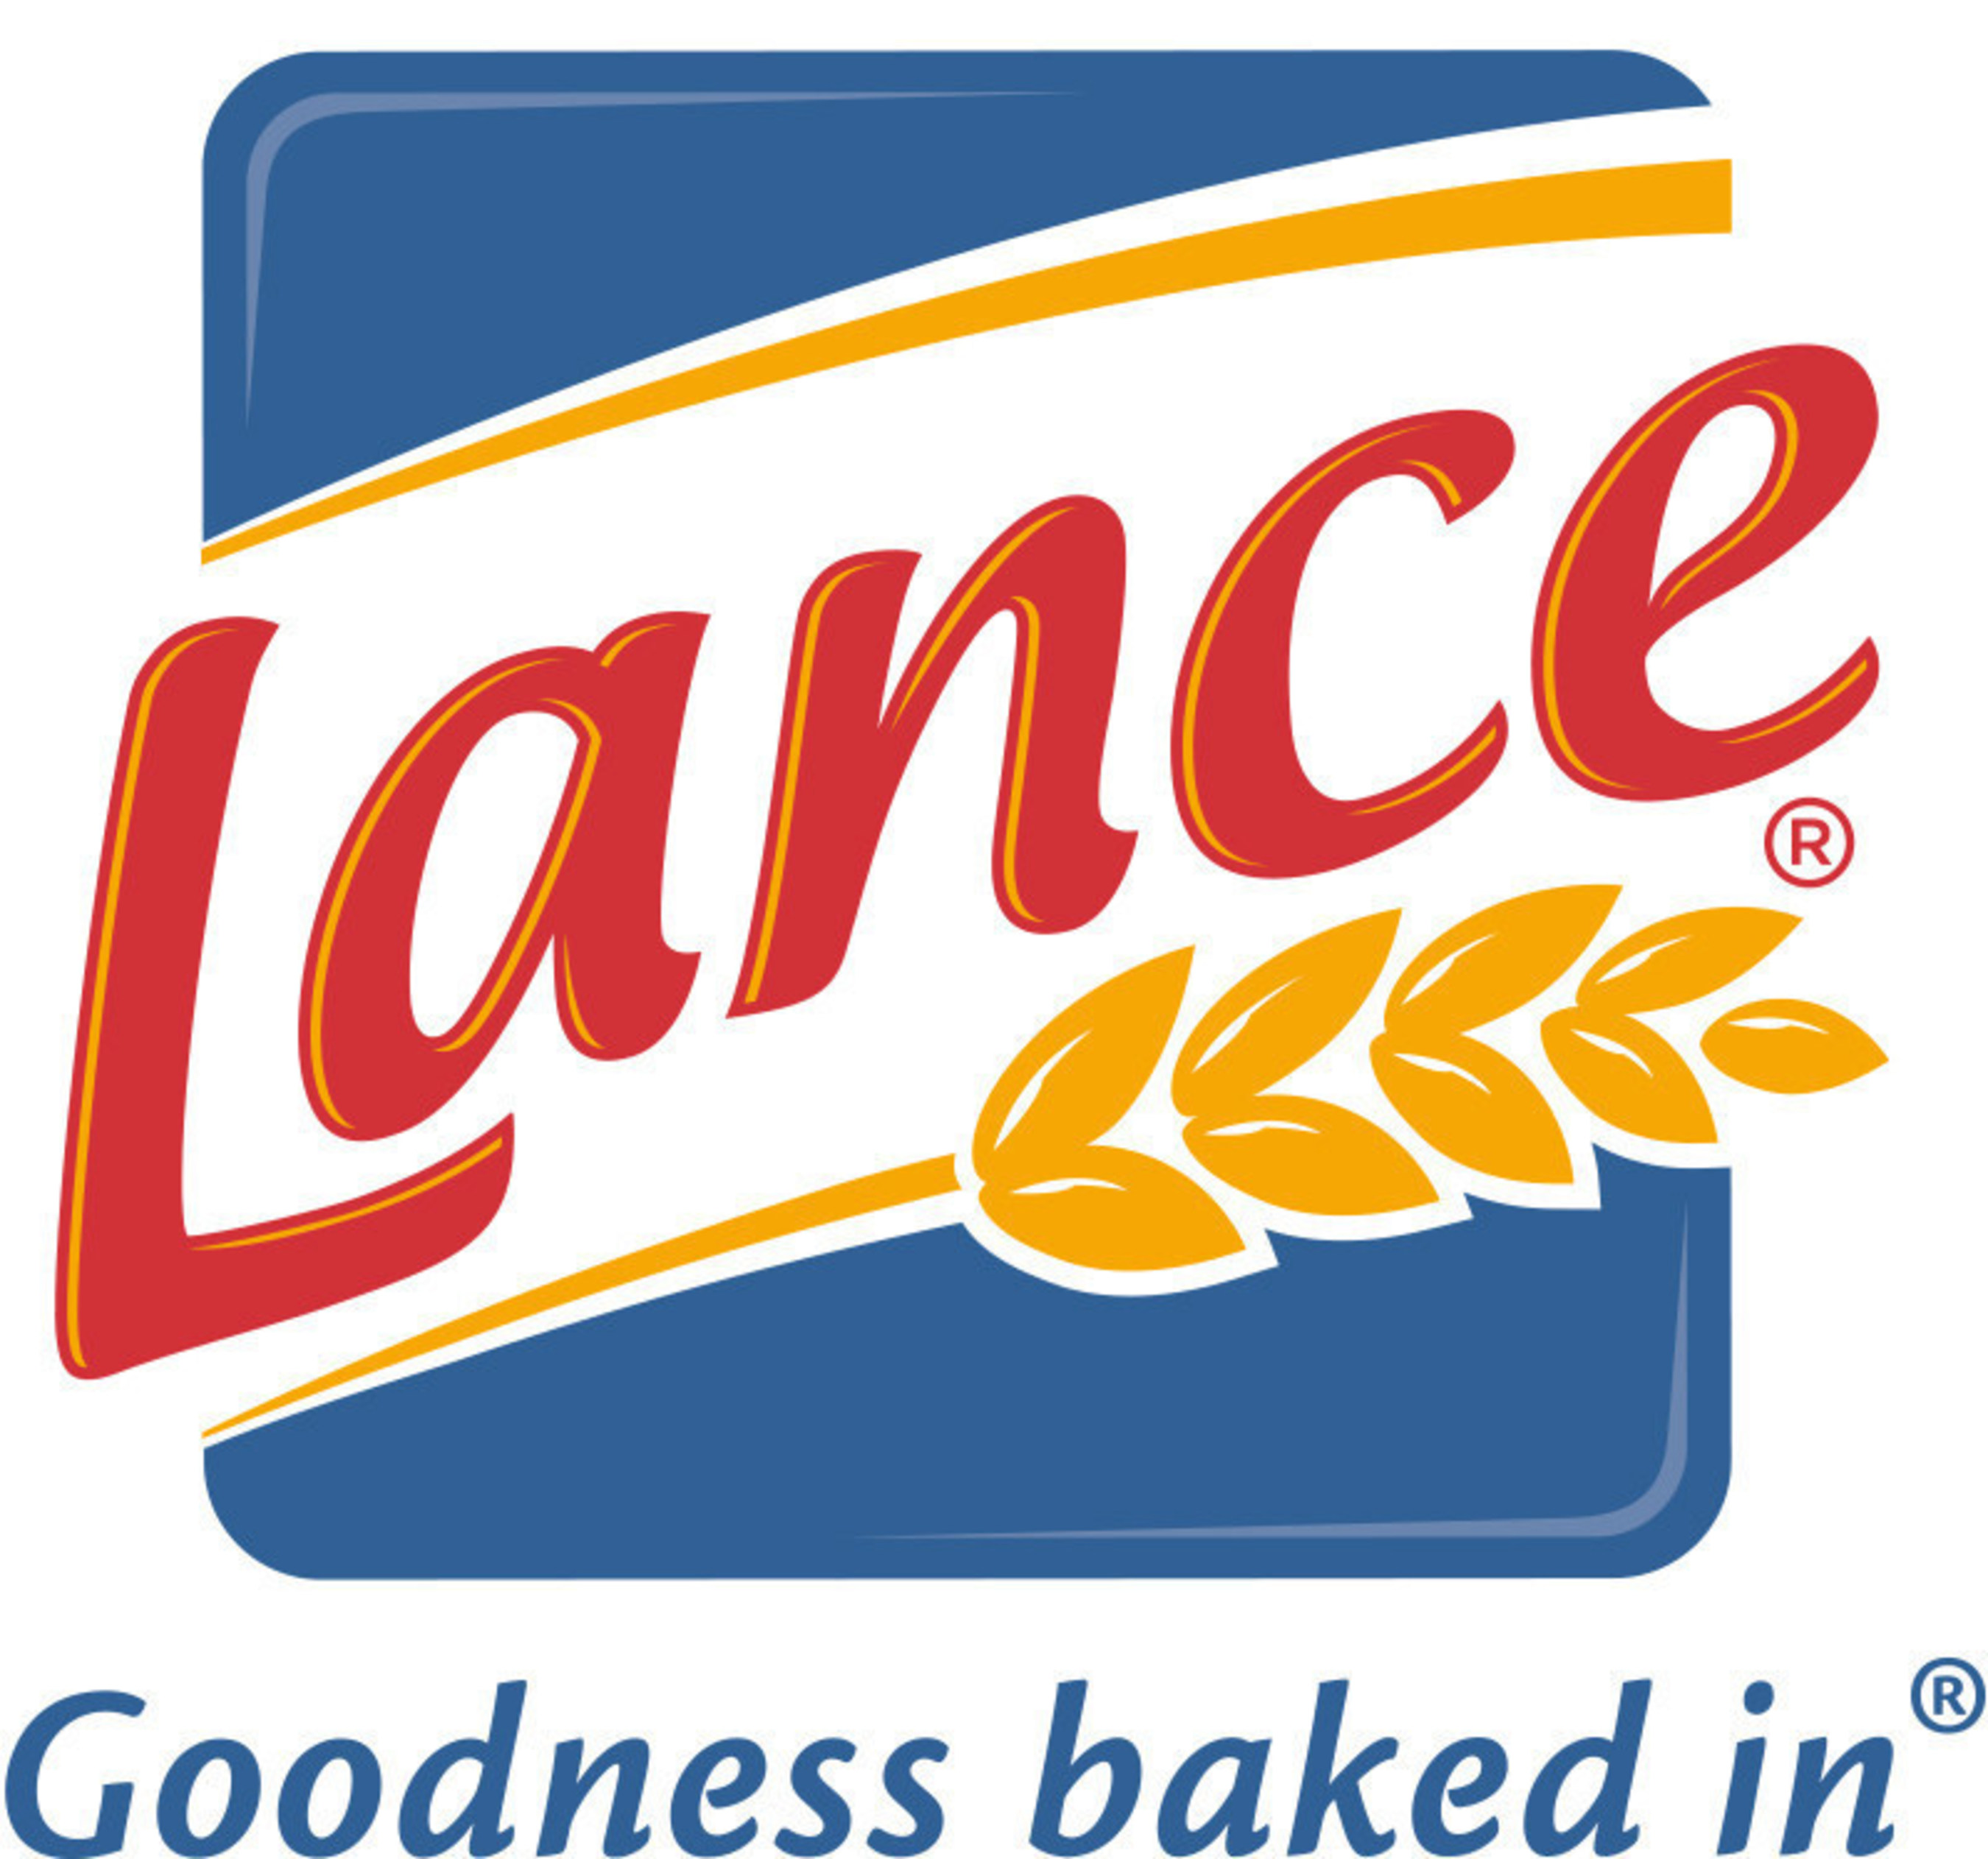 For more than 100 years, Lance has been fueling America with its sandwich crackers - two awesomes and an incredible in the middle.